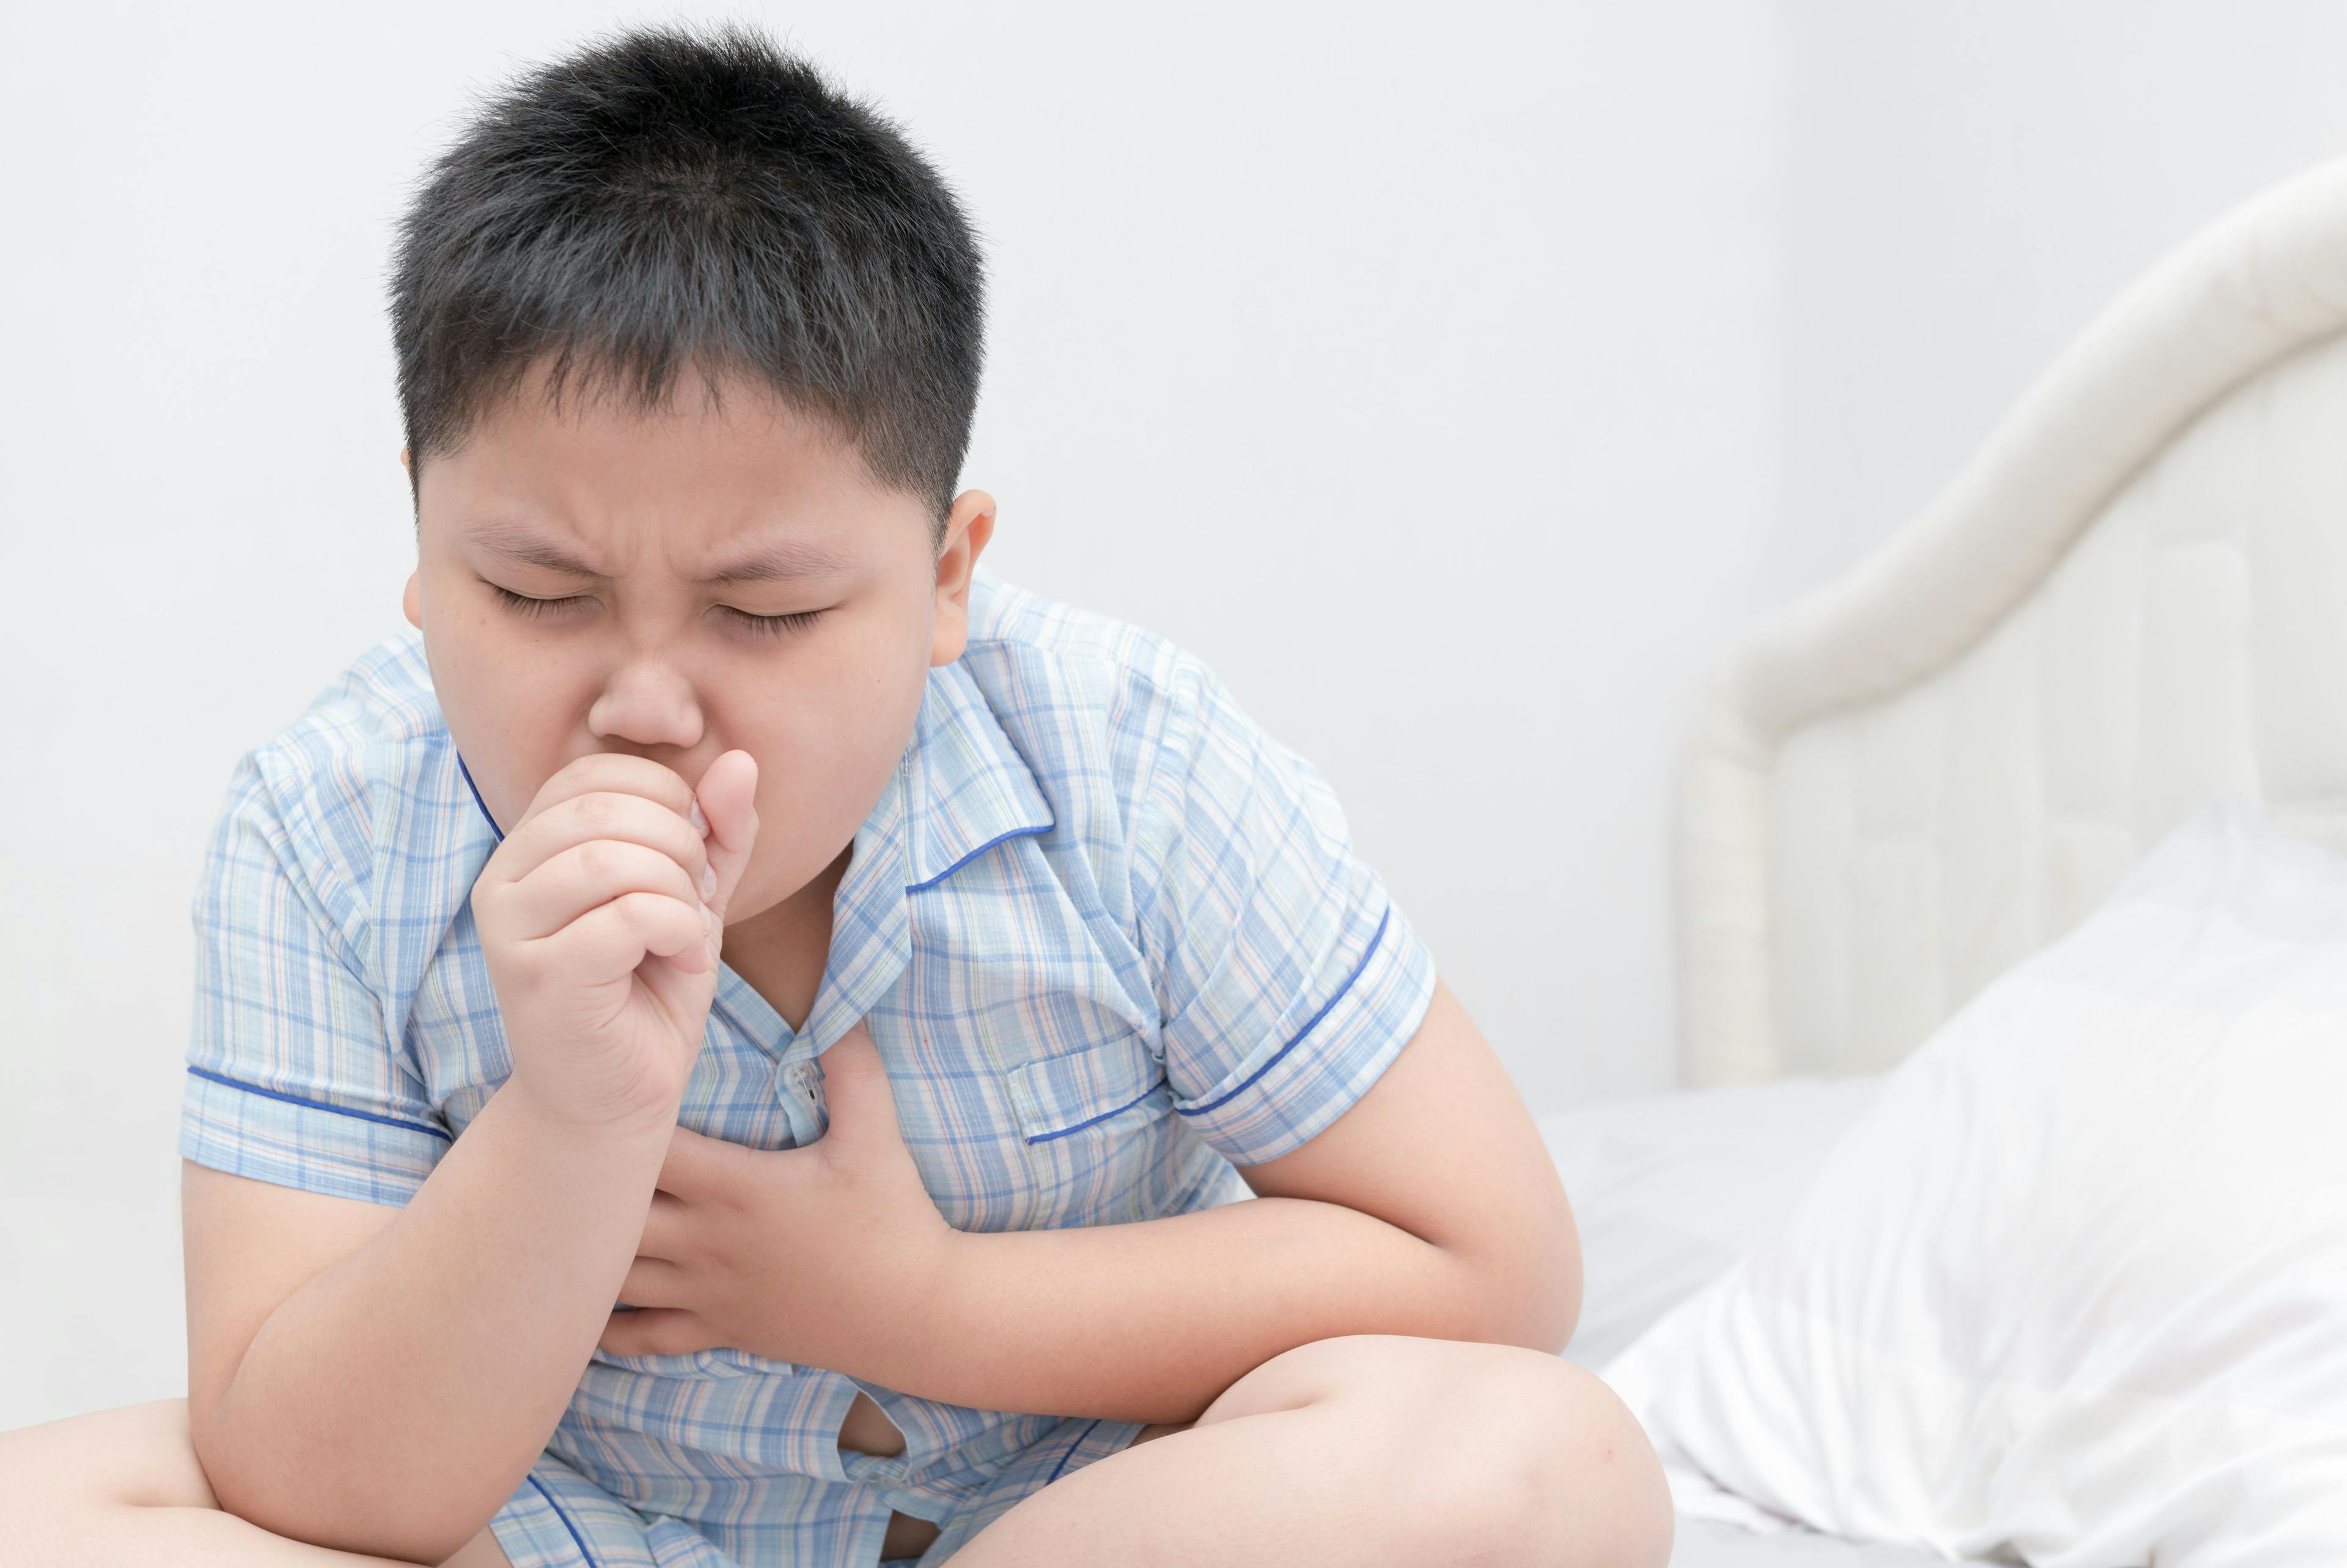 Chronic cough: Watch for "red flags"